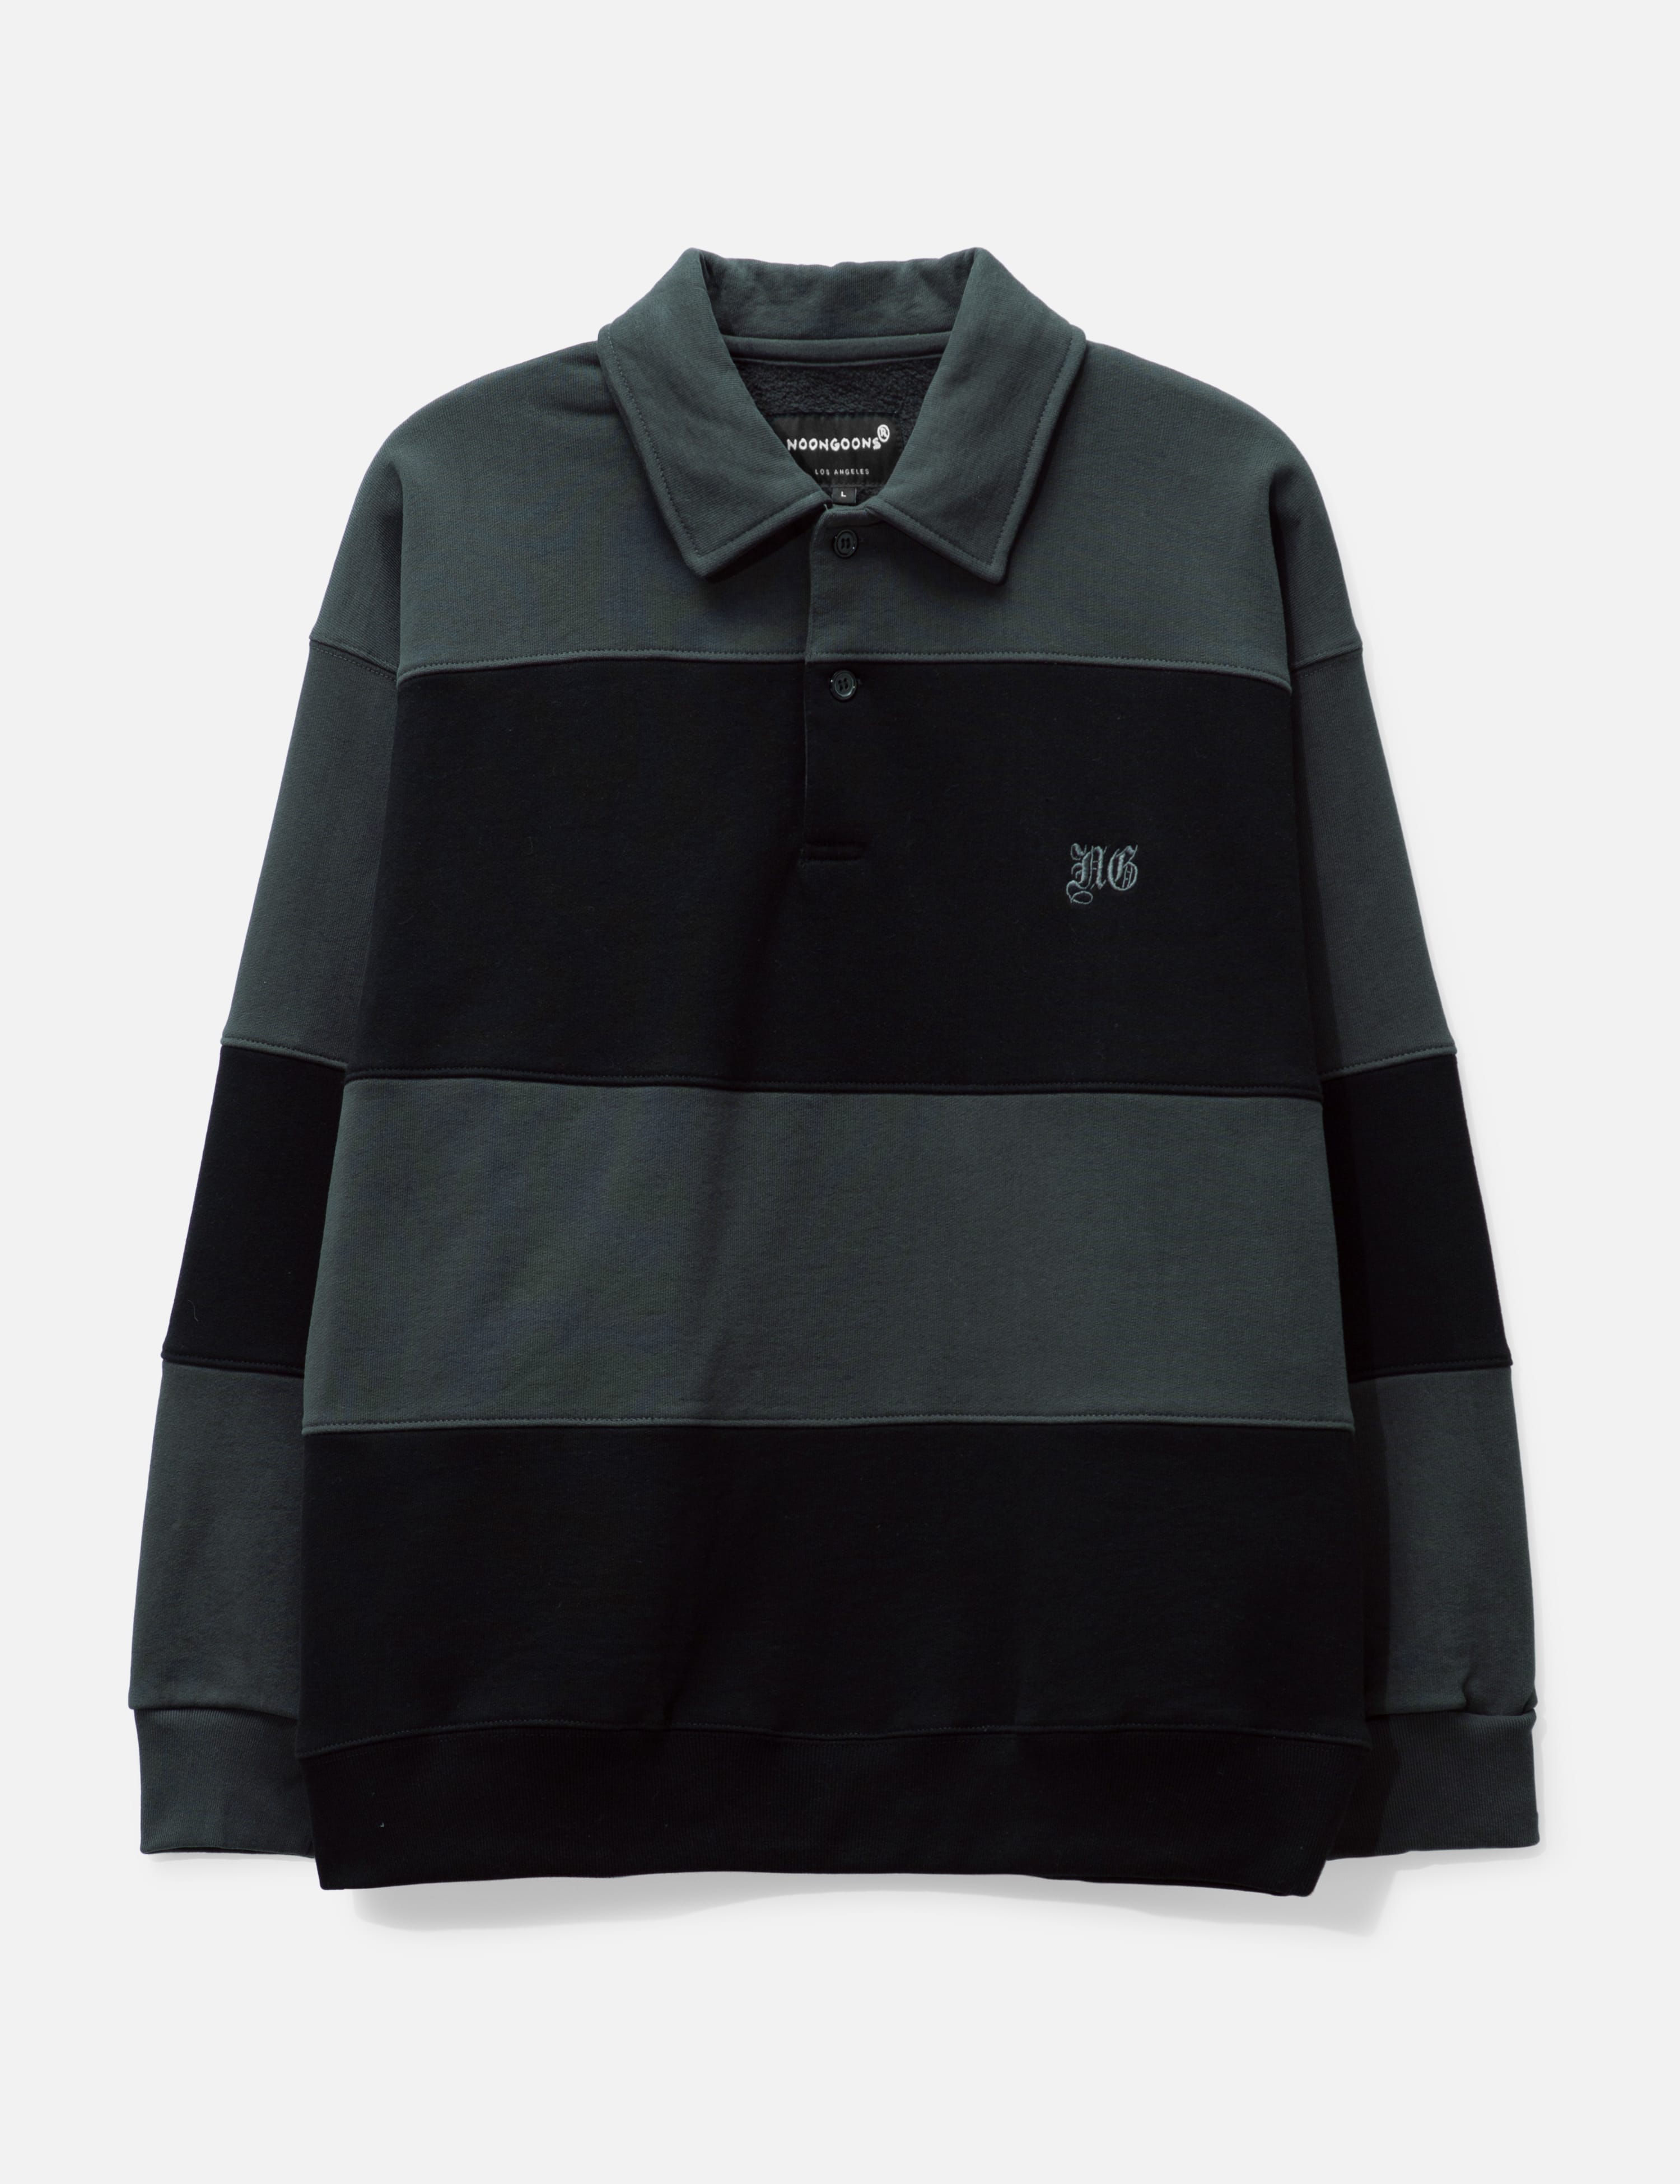 Stüssy - Mask L/S Polo | HBX - Globally Curated Fashion and